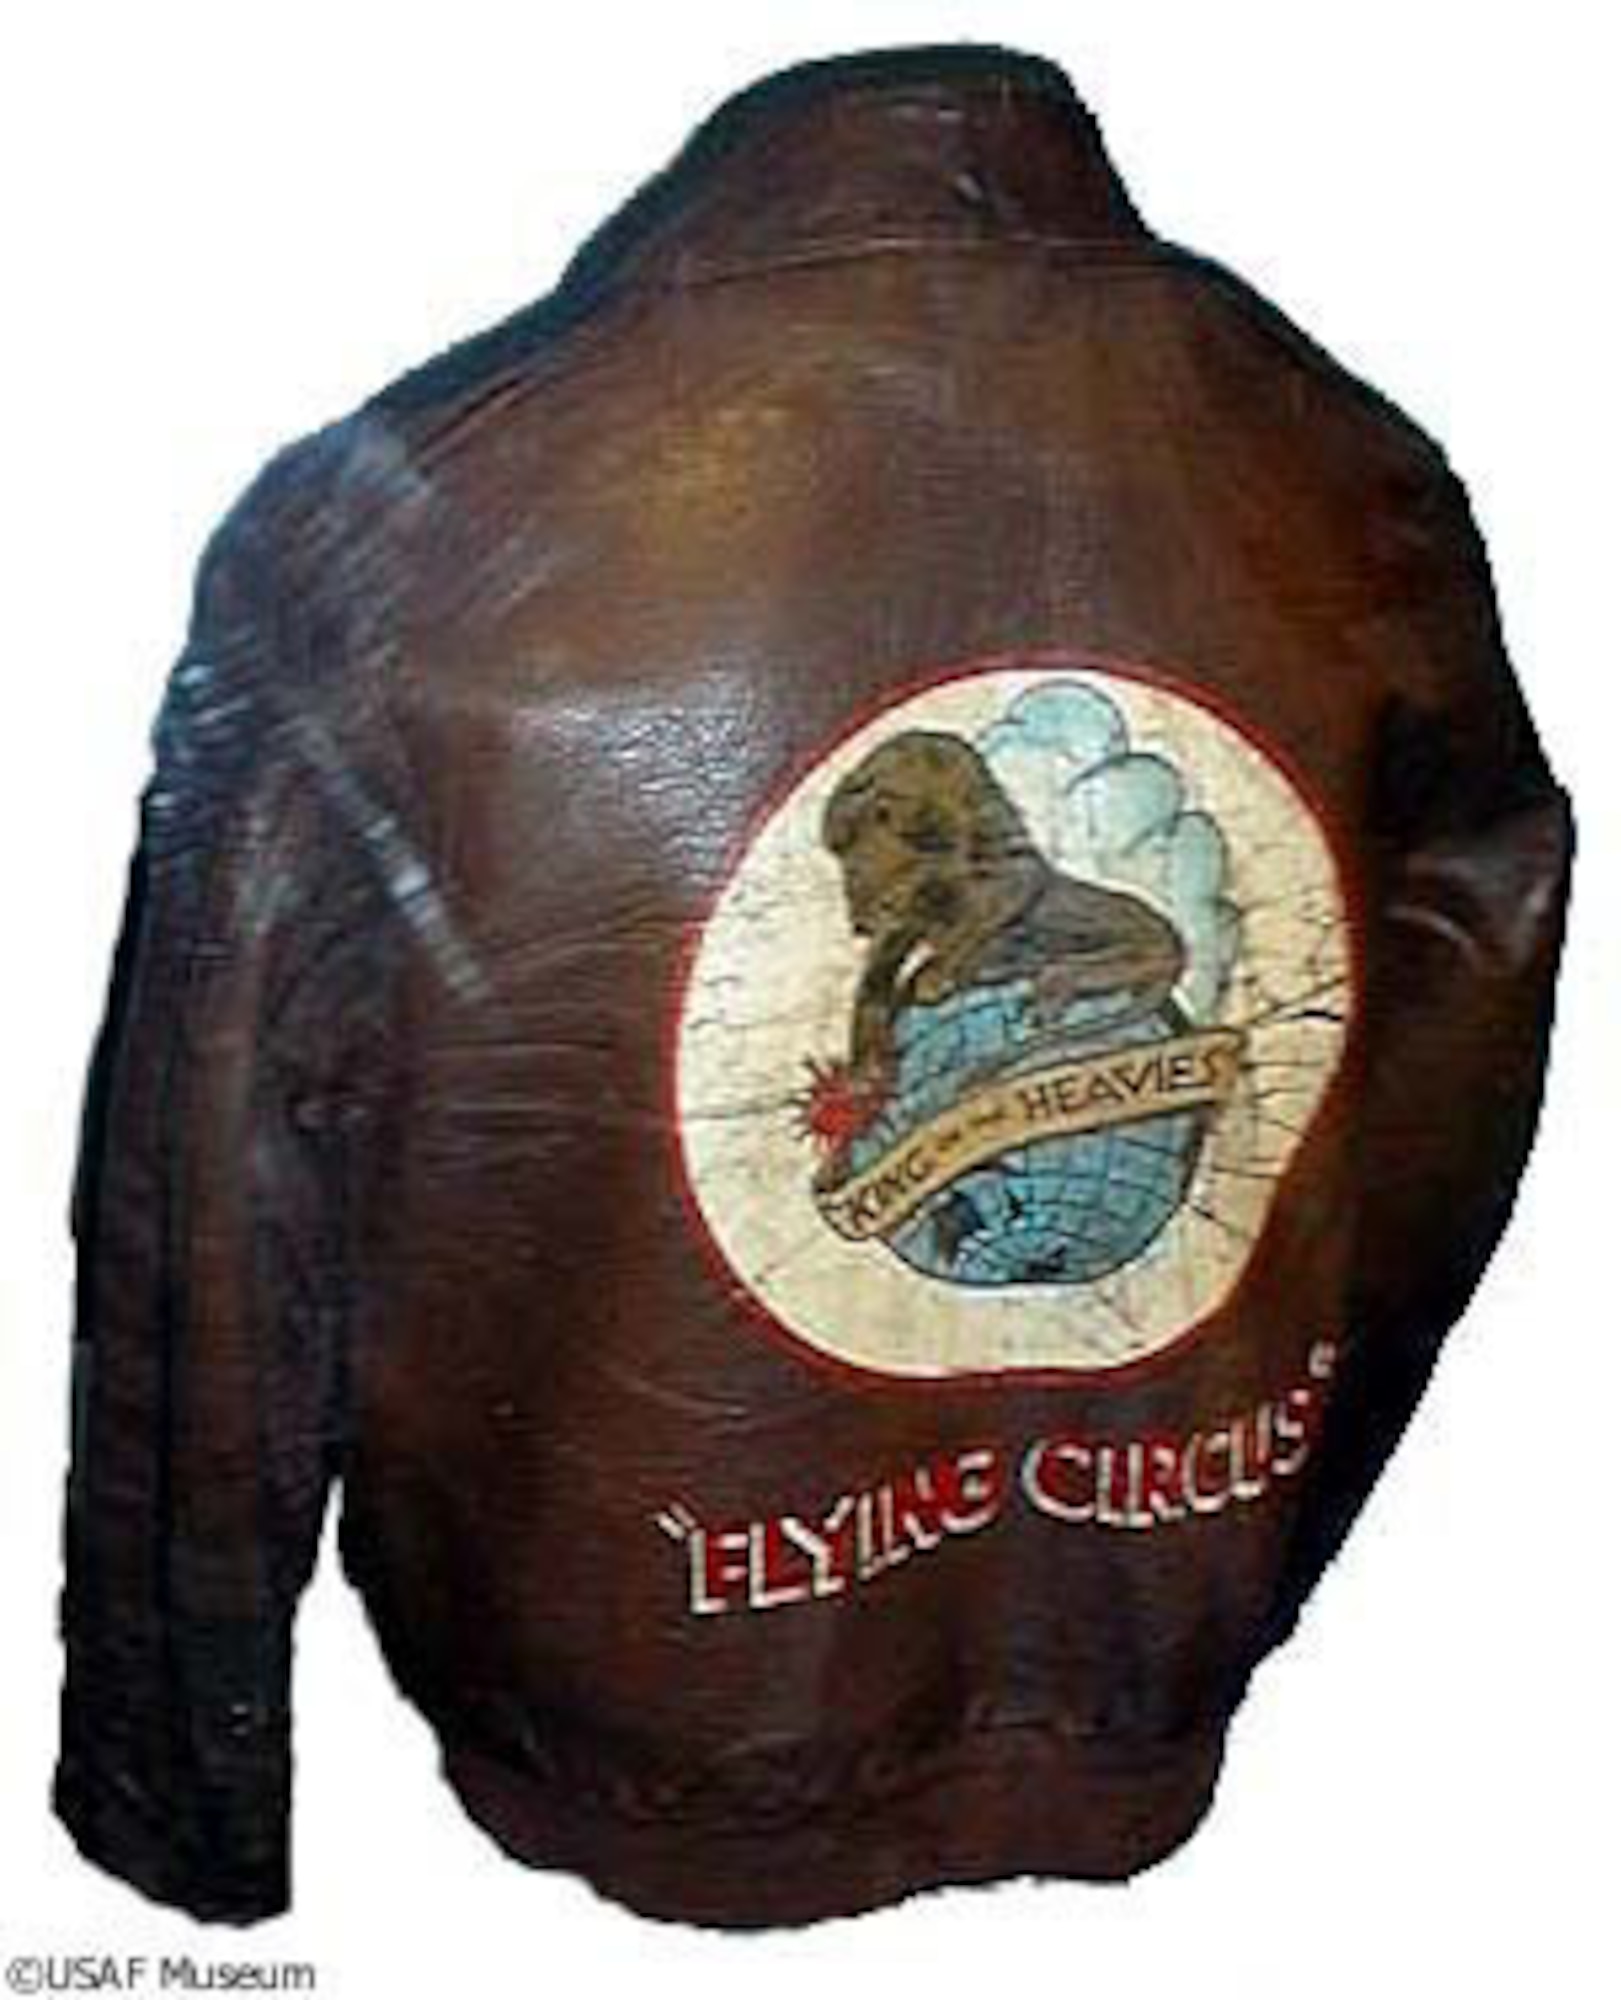 DAYTON, Ohio -- "Flying Circus" aviator jacket on display at the National Museum of the United States Air Force. (U.S. Air Force photo)